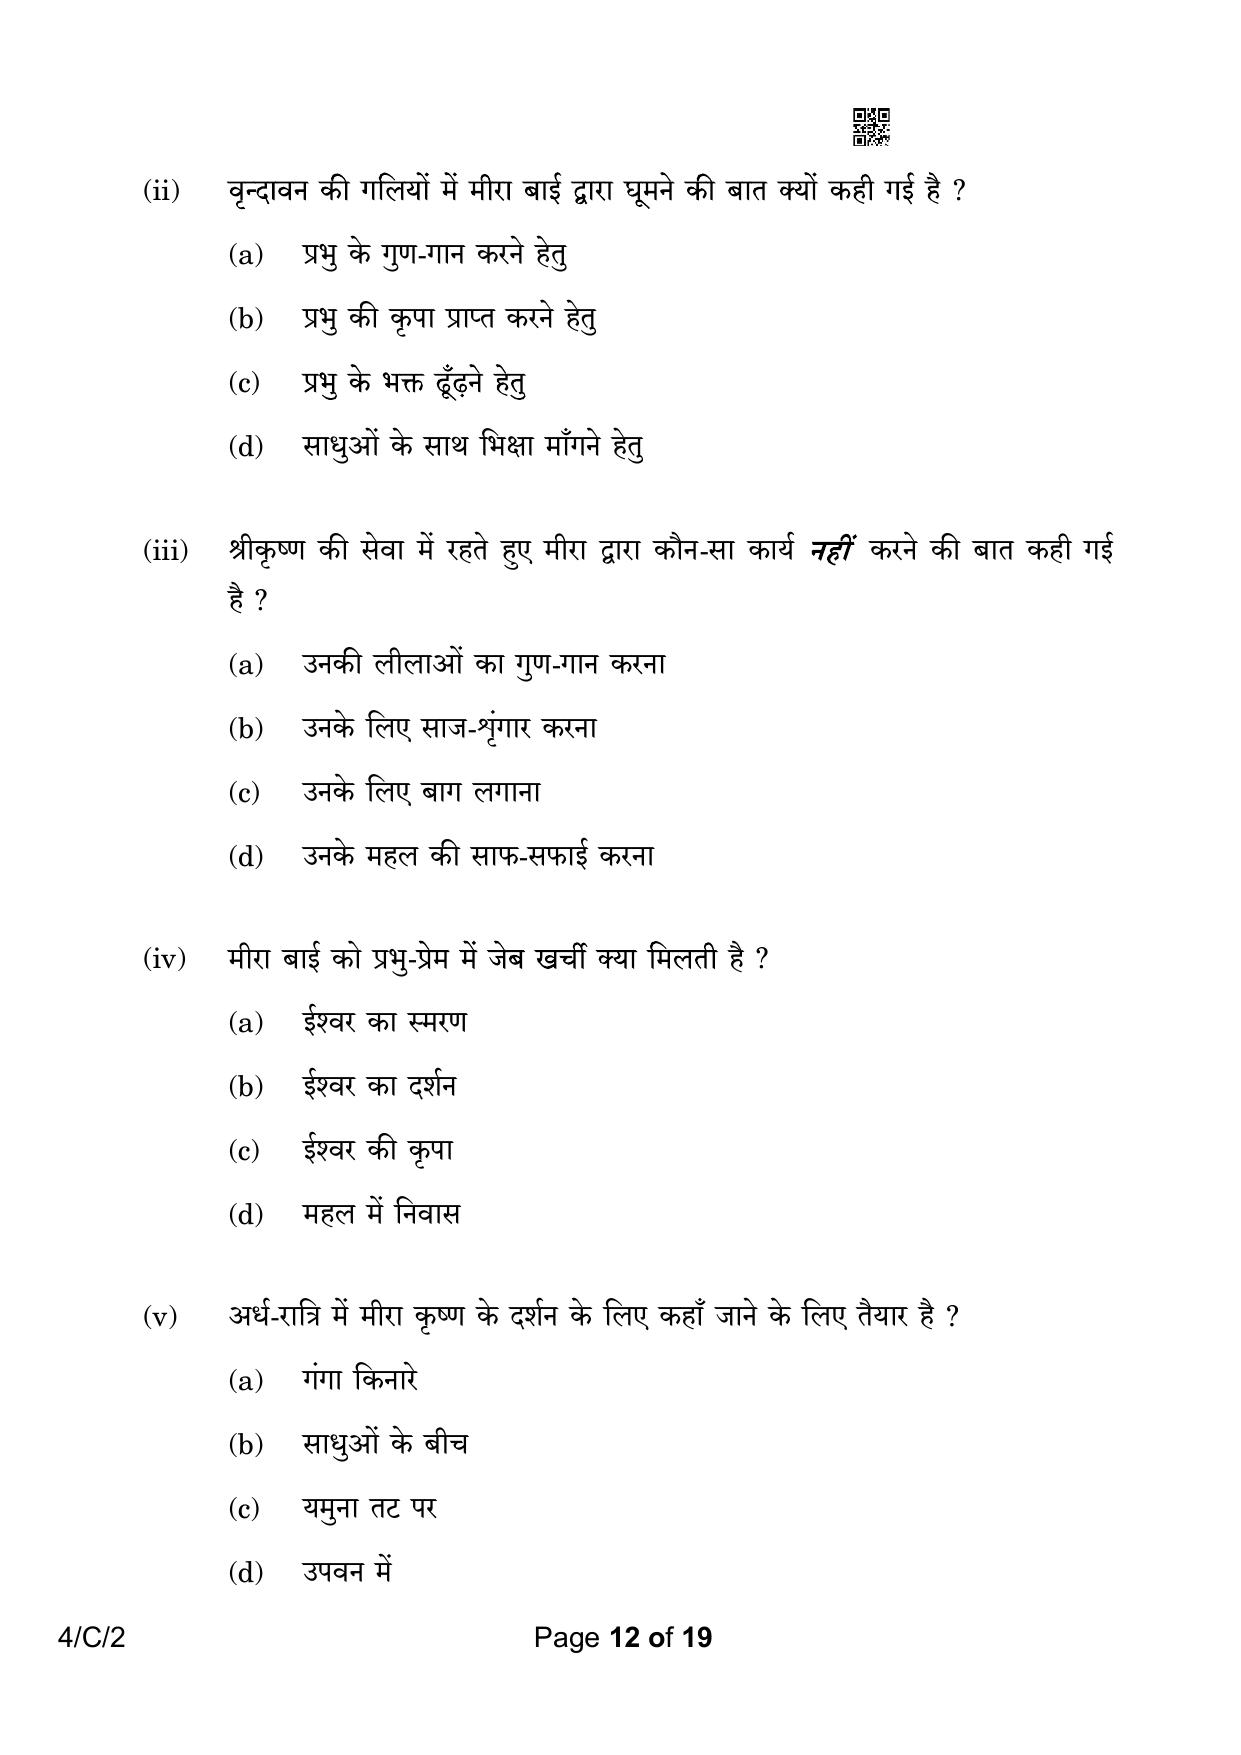 CBSE Class 10 4-2 Hindi B 2023 (Compartment) Question Paper - Page 12